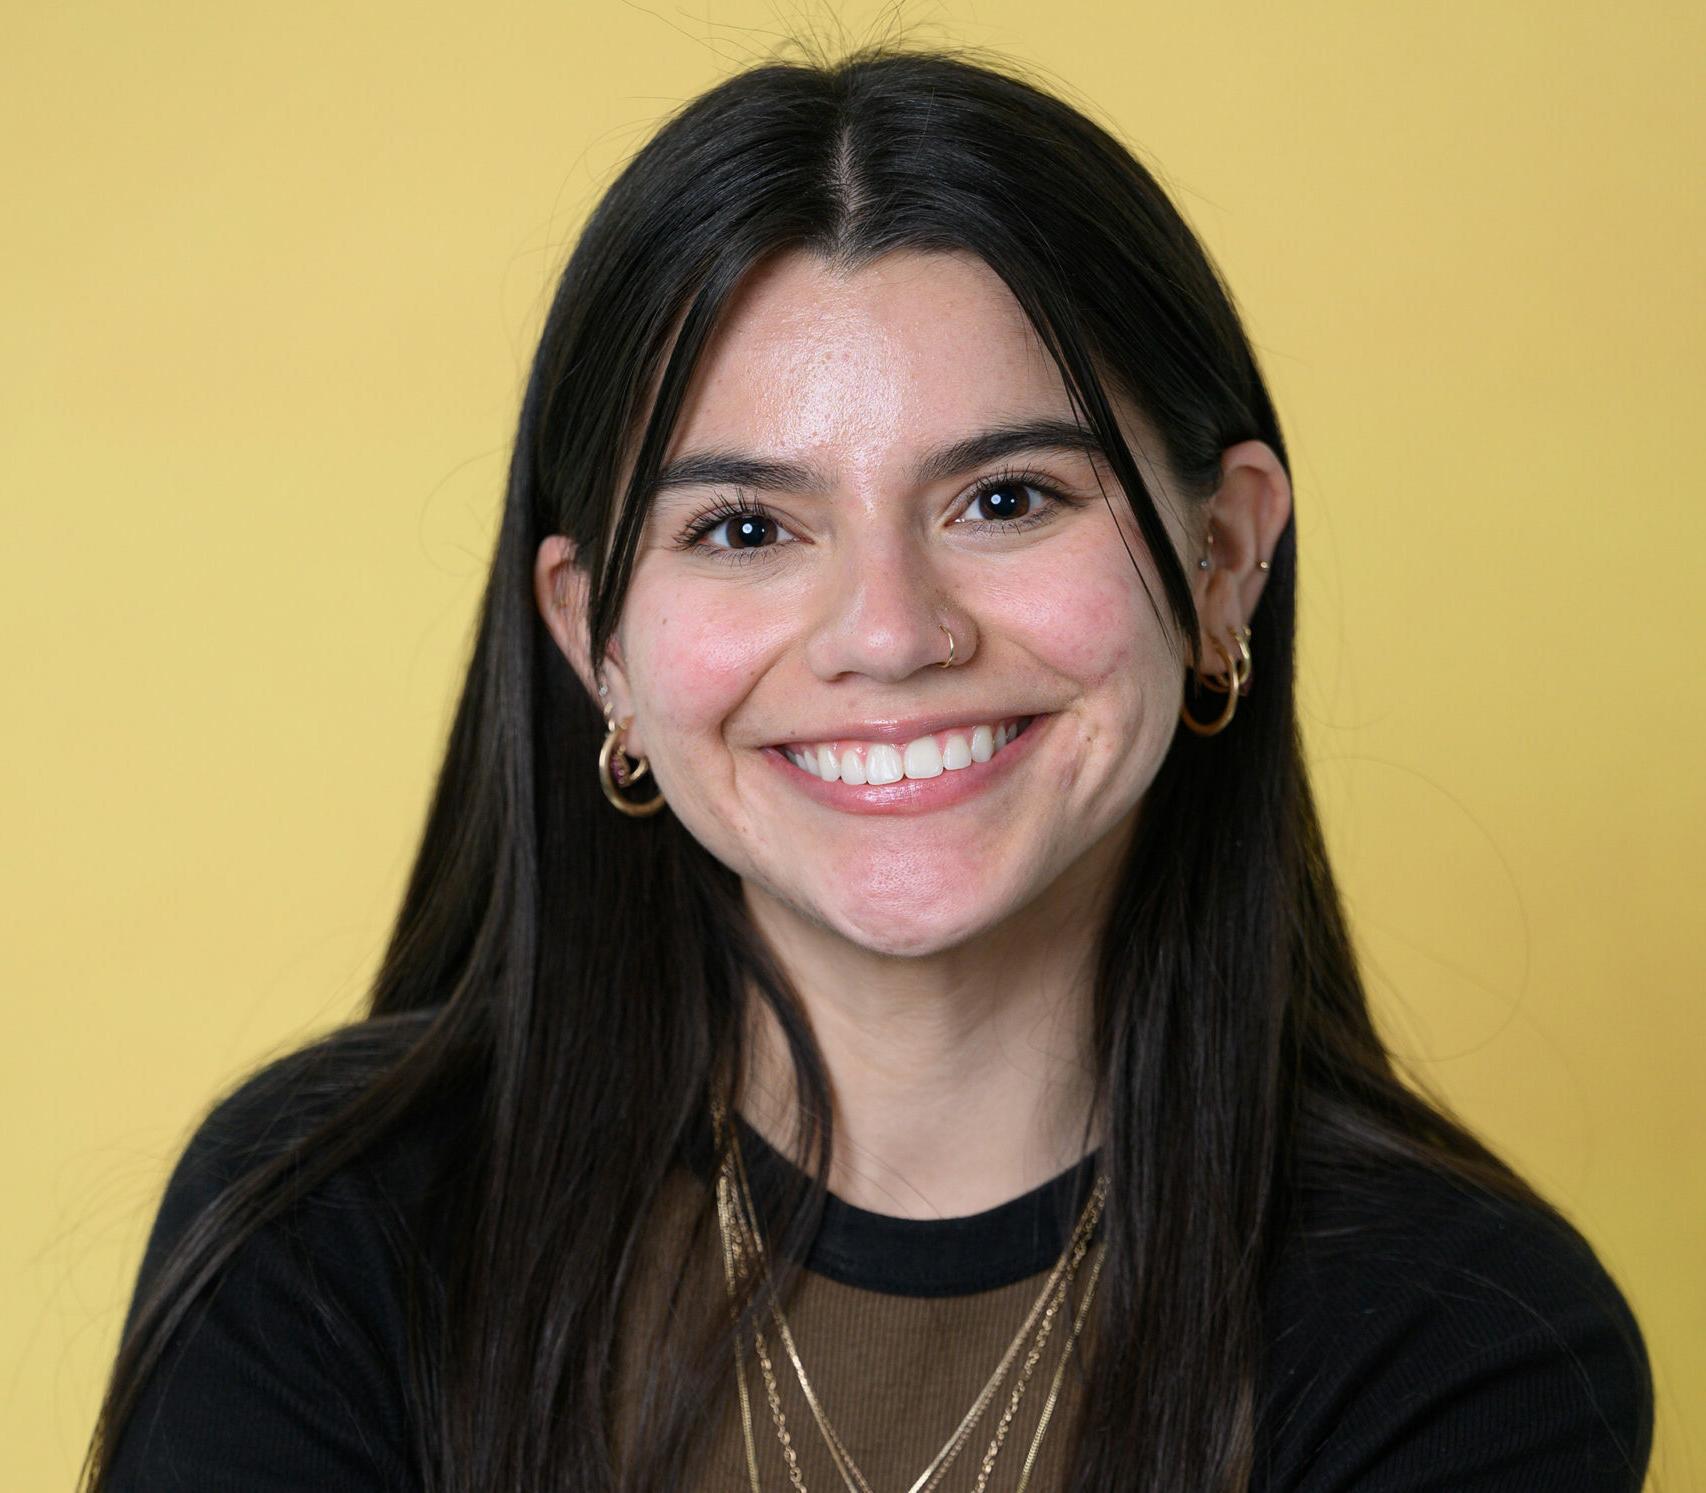 A female student is smiling in front of a yellow background